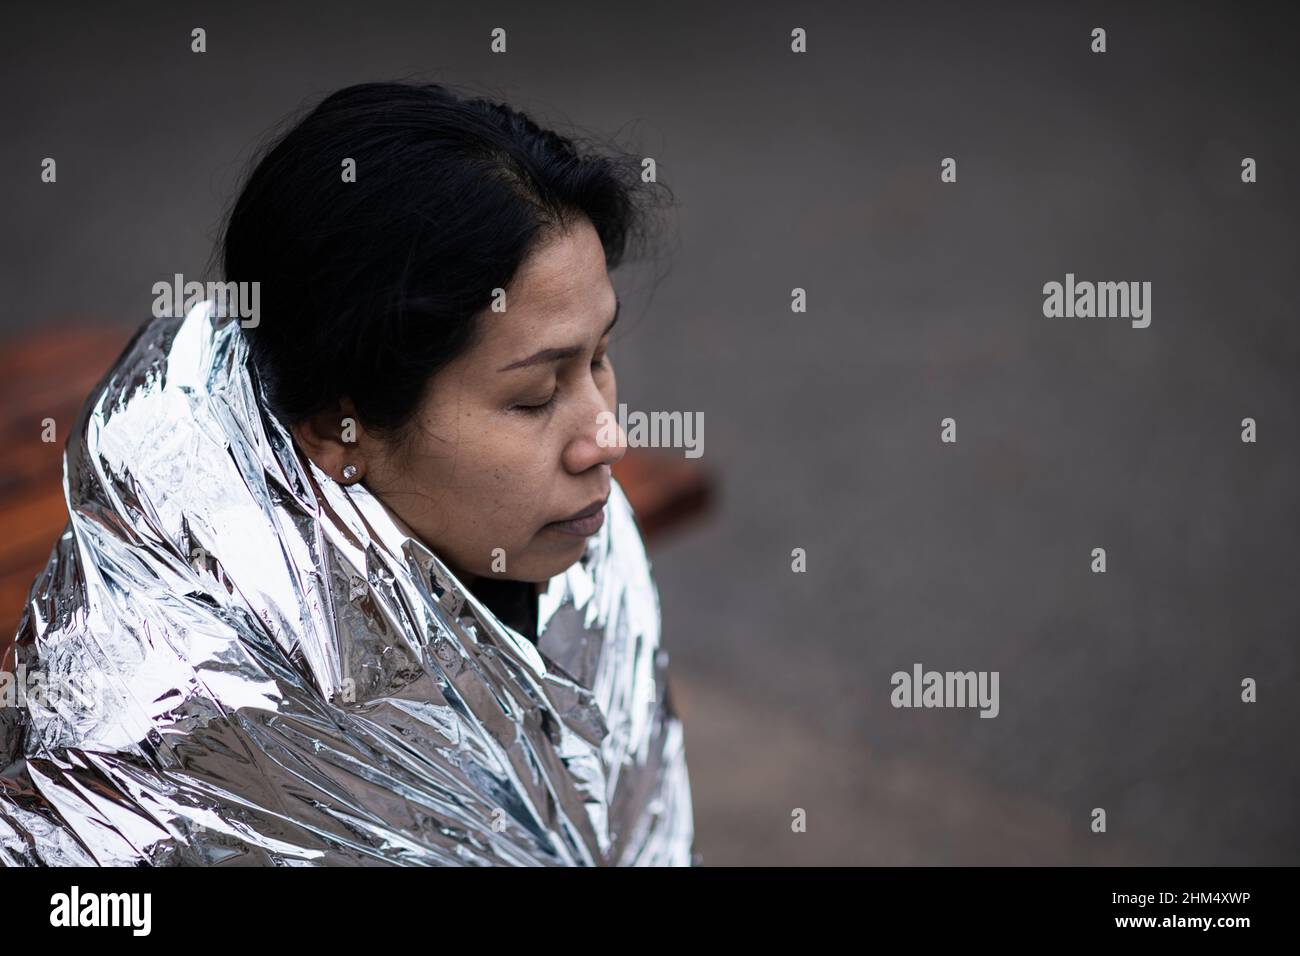 Woman wrapped in emergency blanket Stock Photo